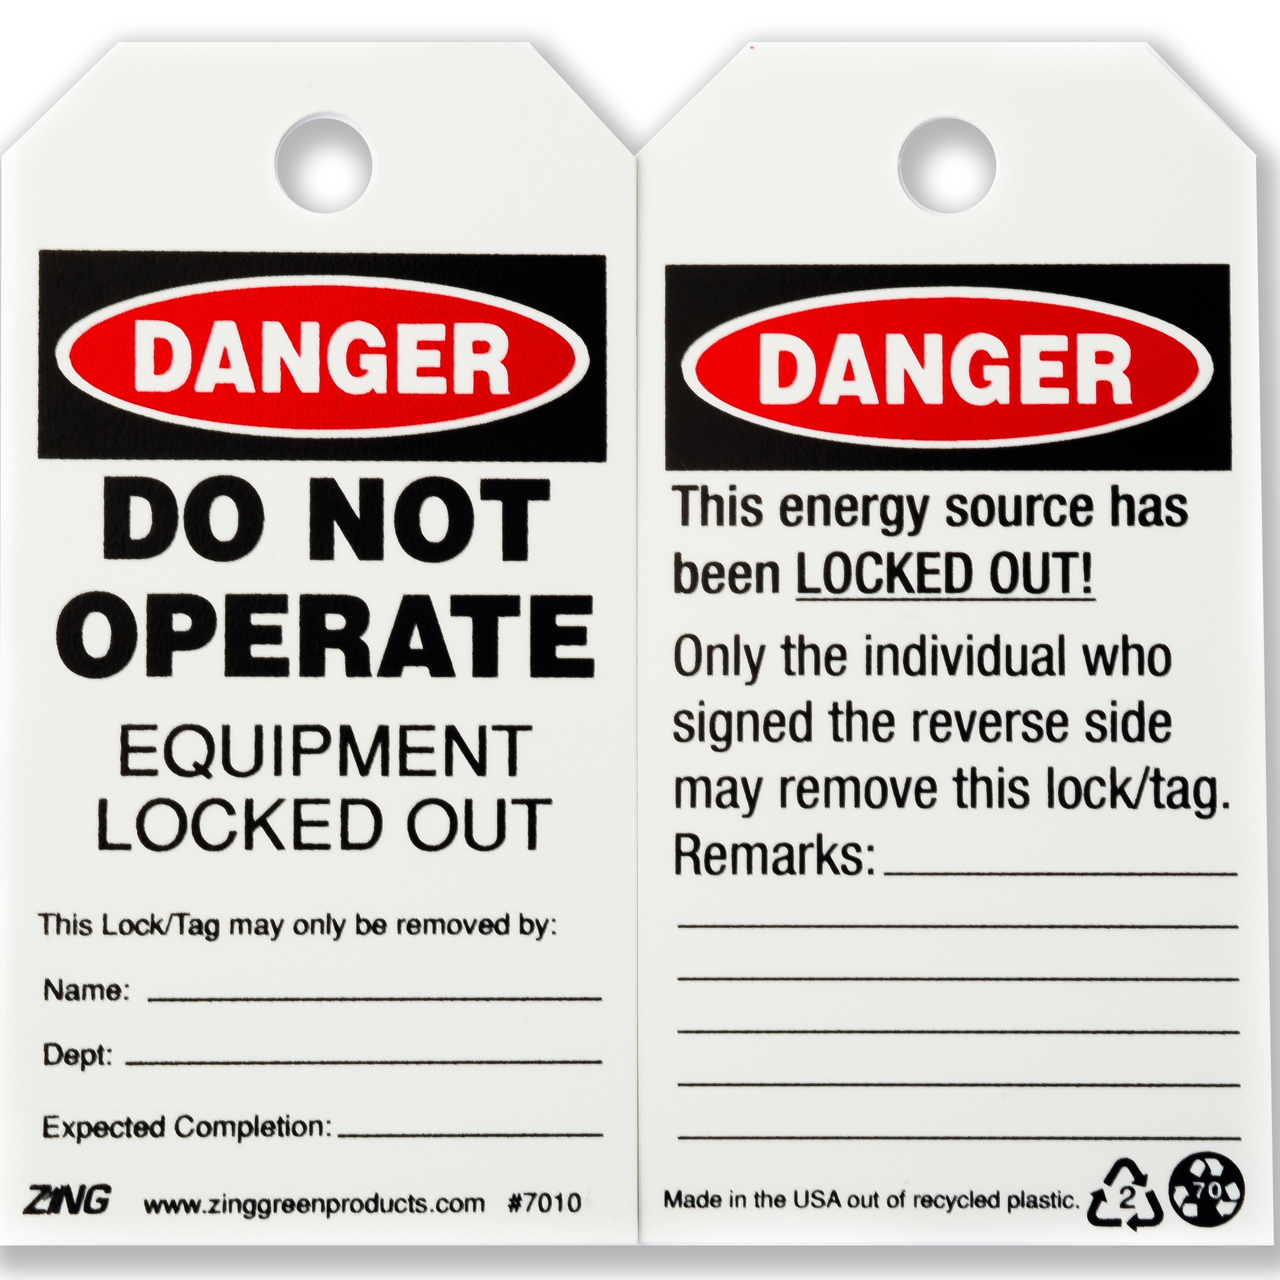 ZING Eco Safety Tag, DANGER Do Not Operate, 5.75Hx3W, 10 Pack